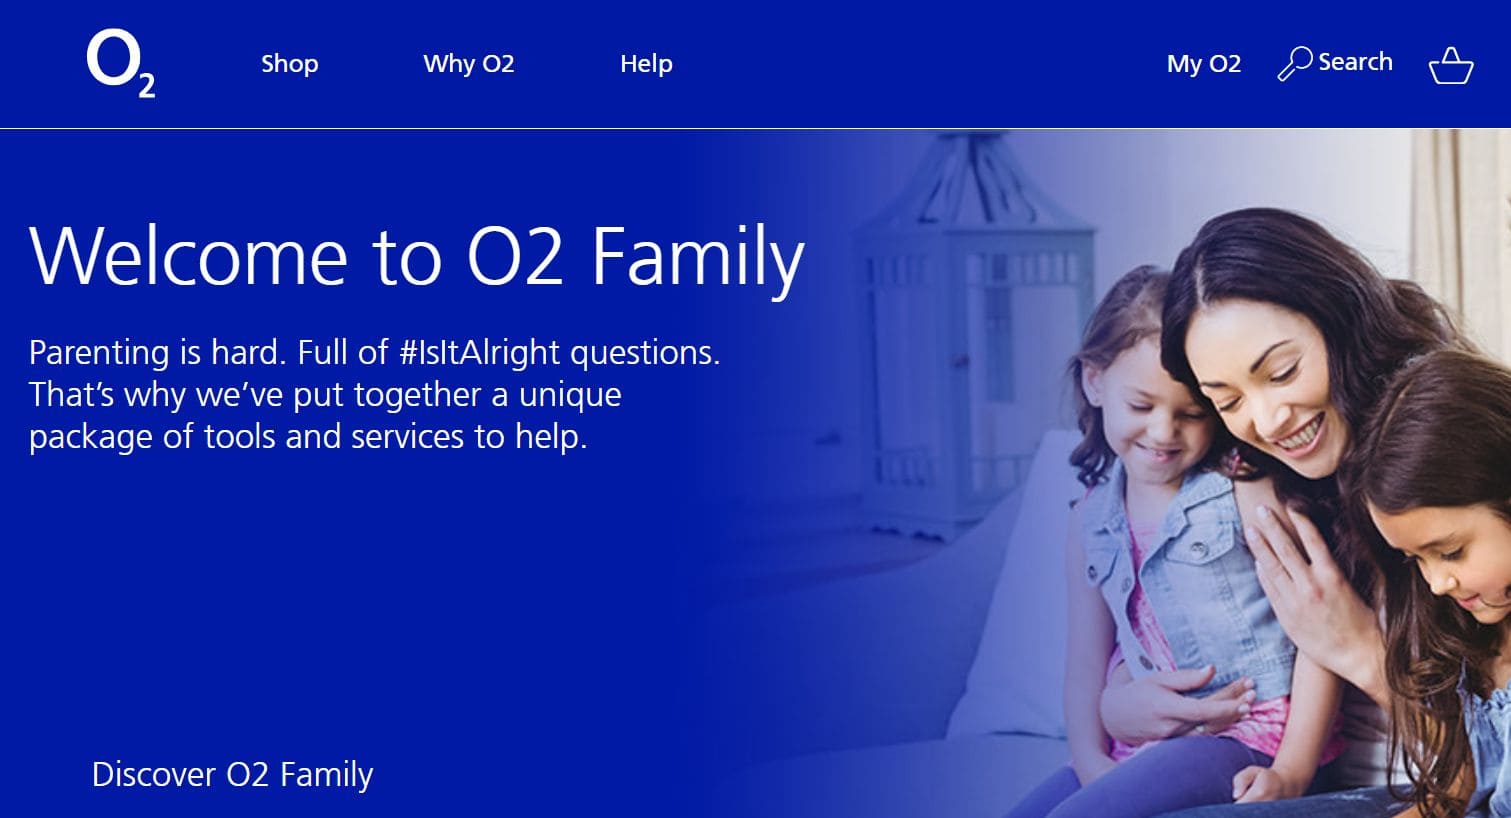 An image of the O2 Family Plan website